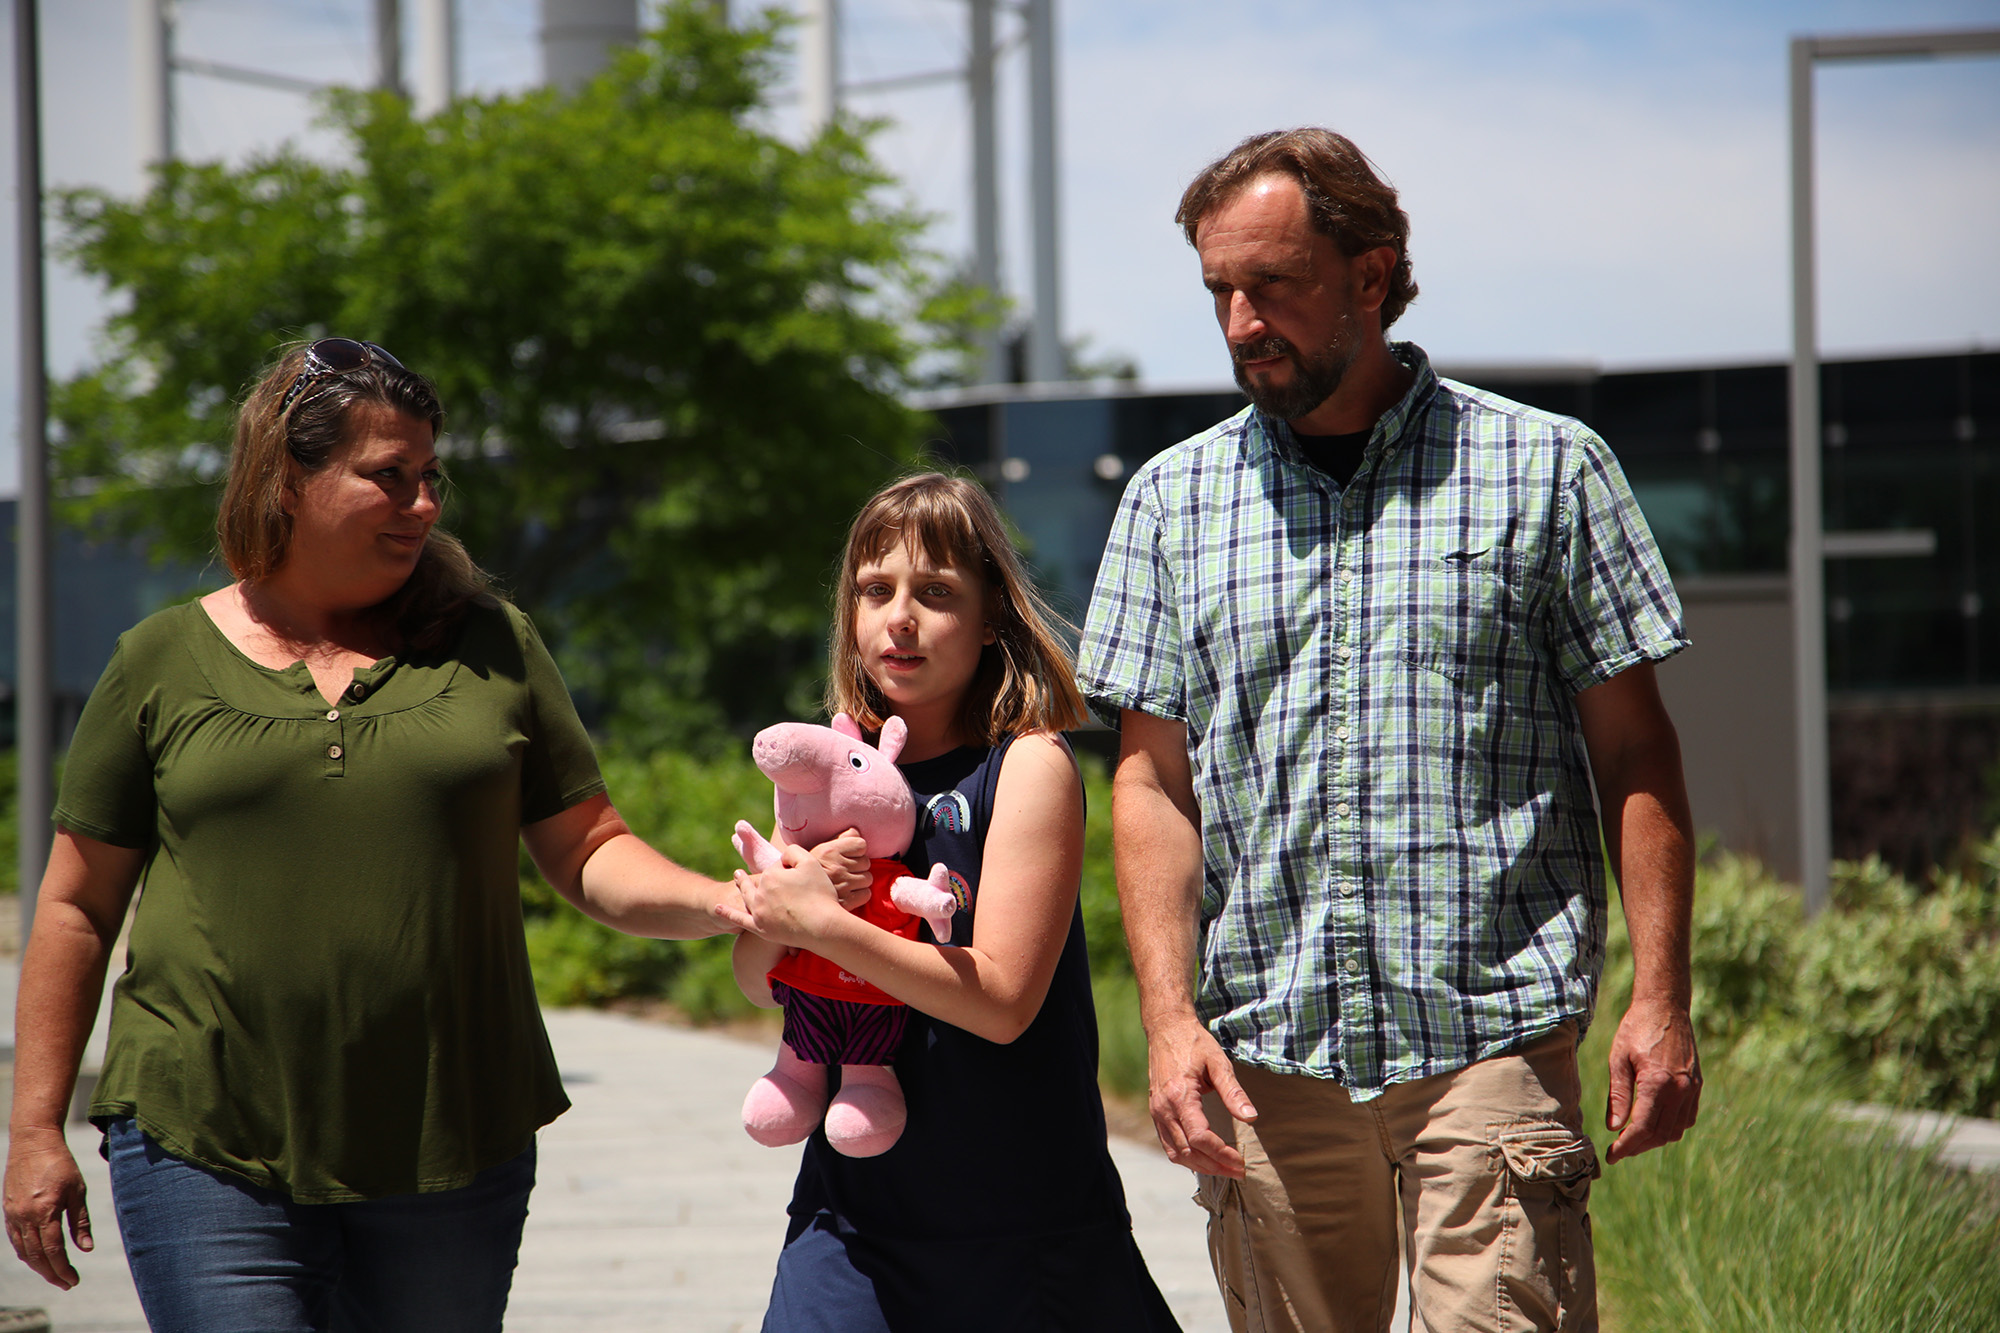 a young girl holding a stuffed animal walking with her parents